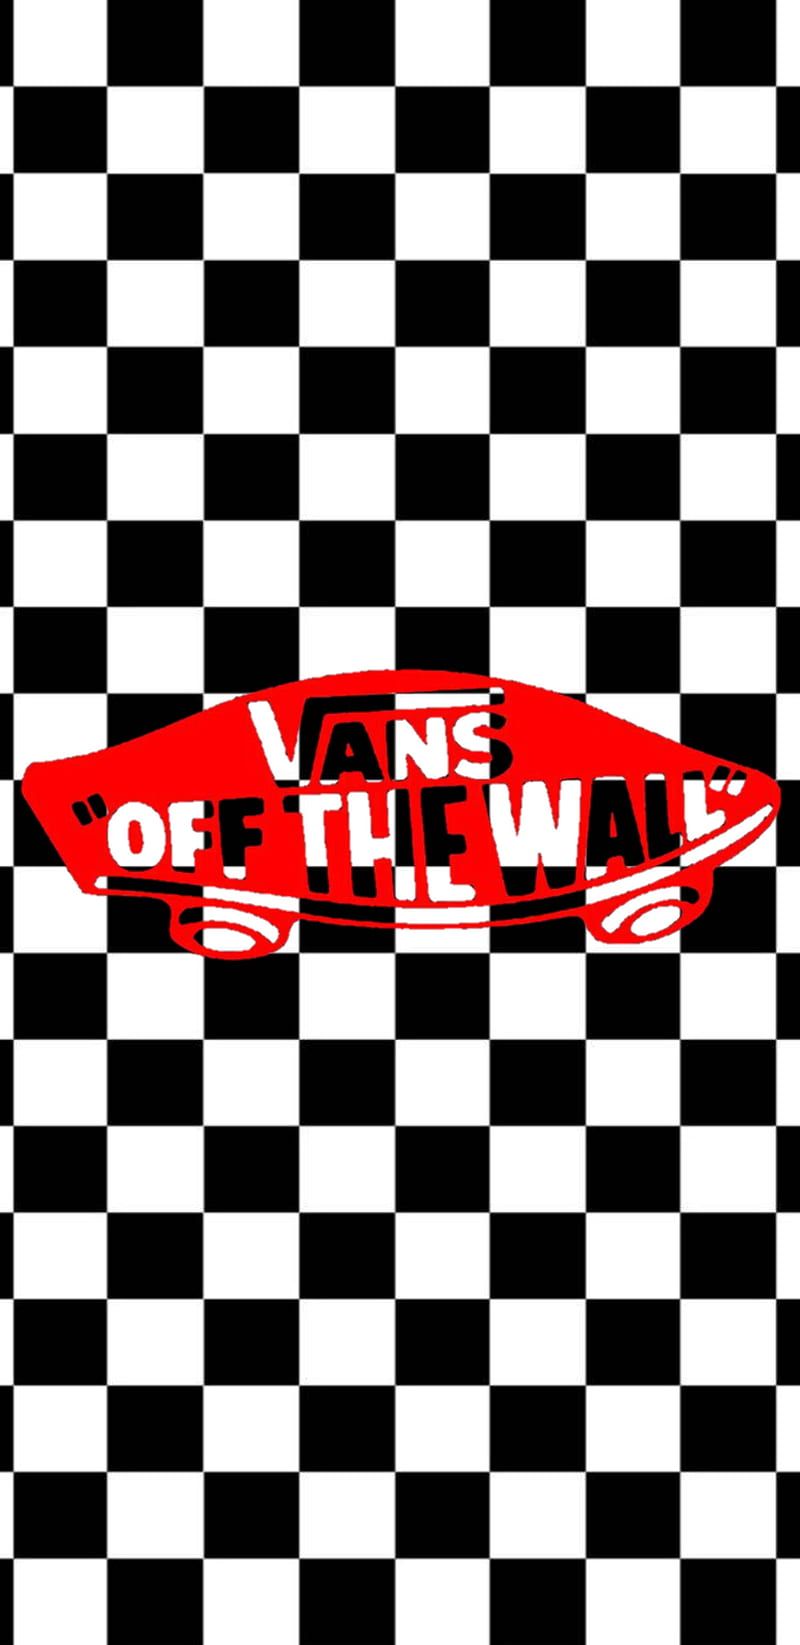 Vans off the wall checkered background - Vans, checkered